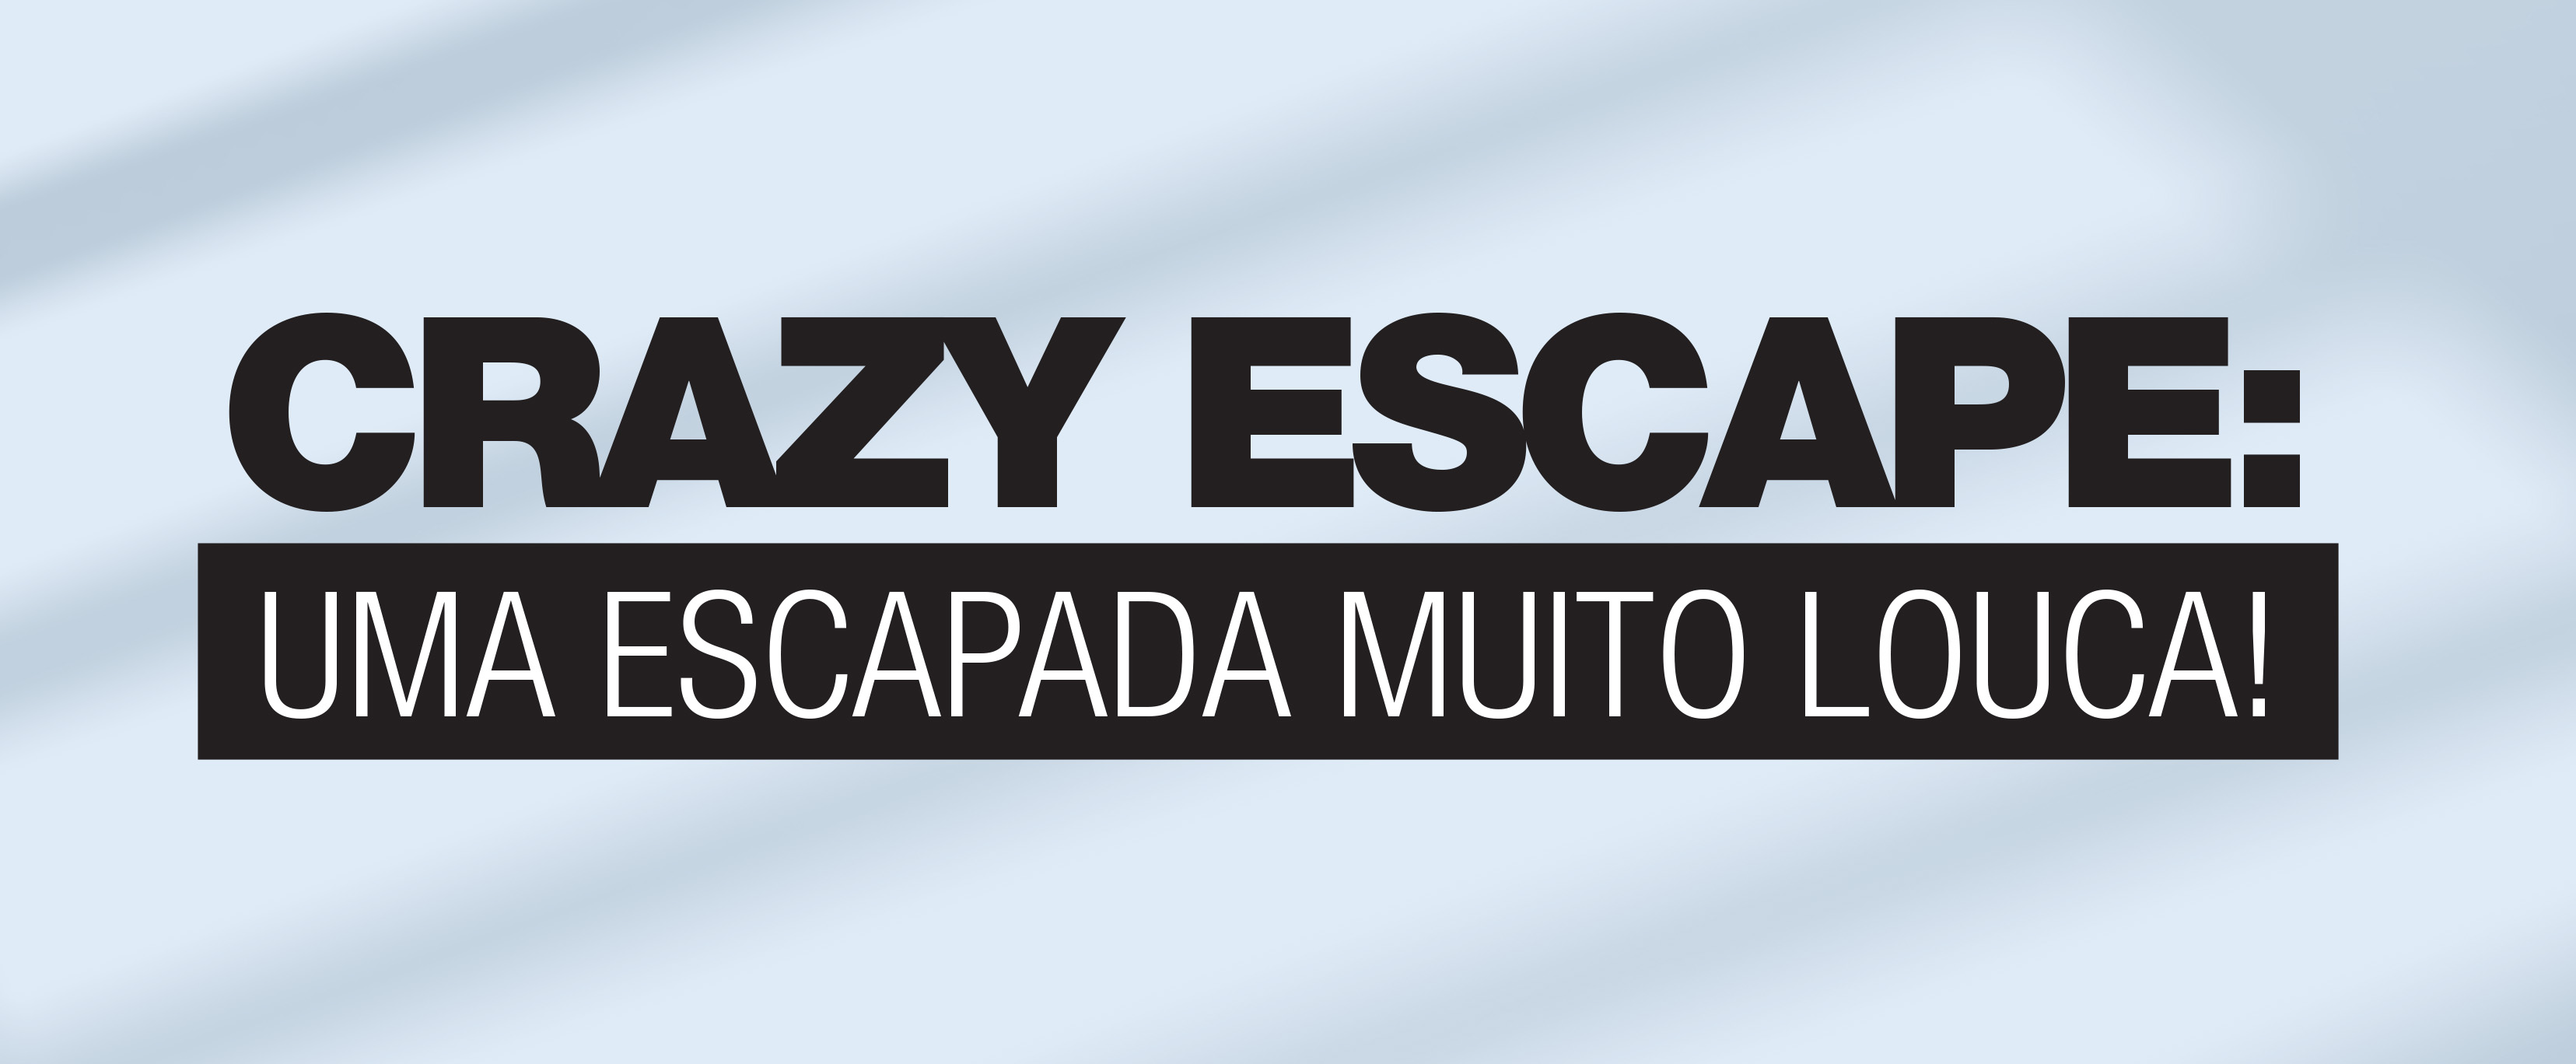 Crazy Escape: Escaping the Madhouse!